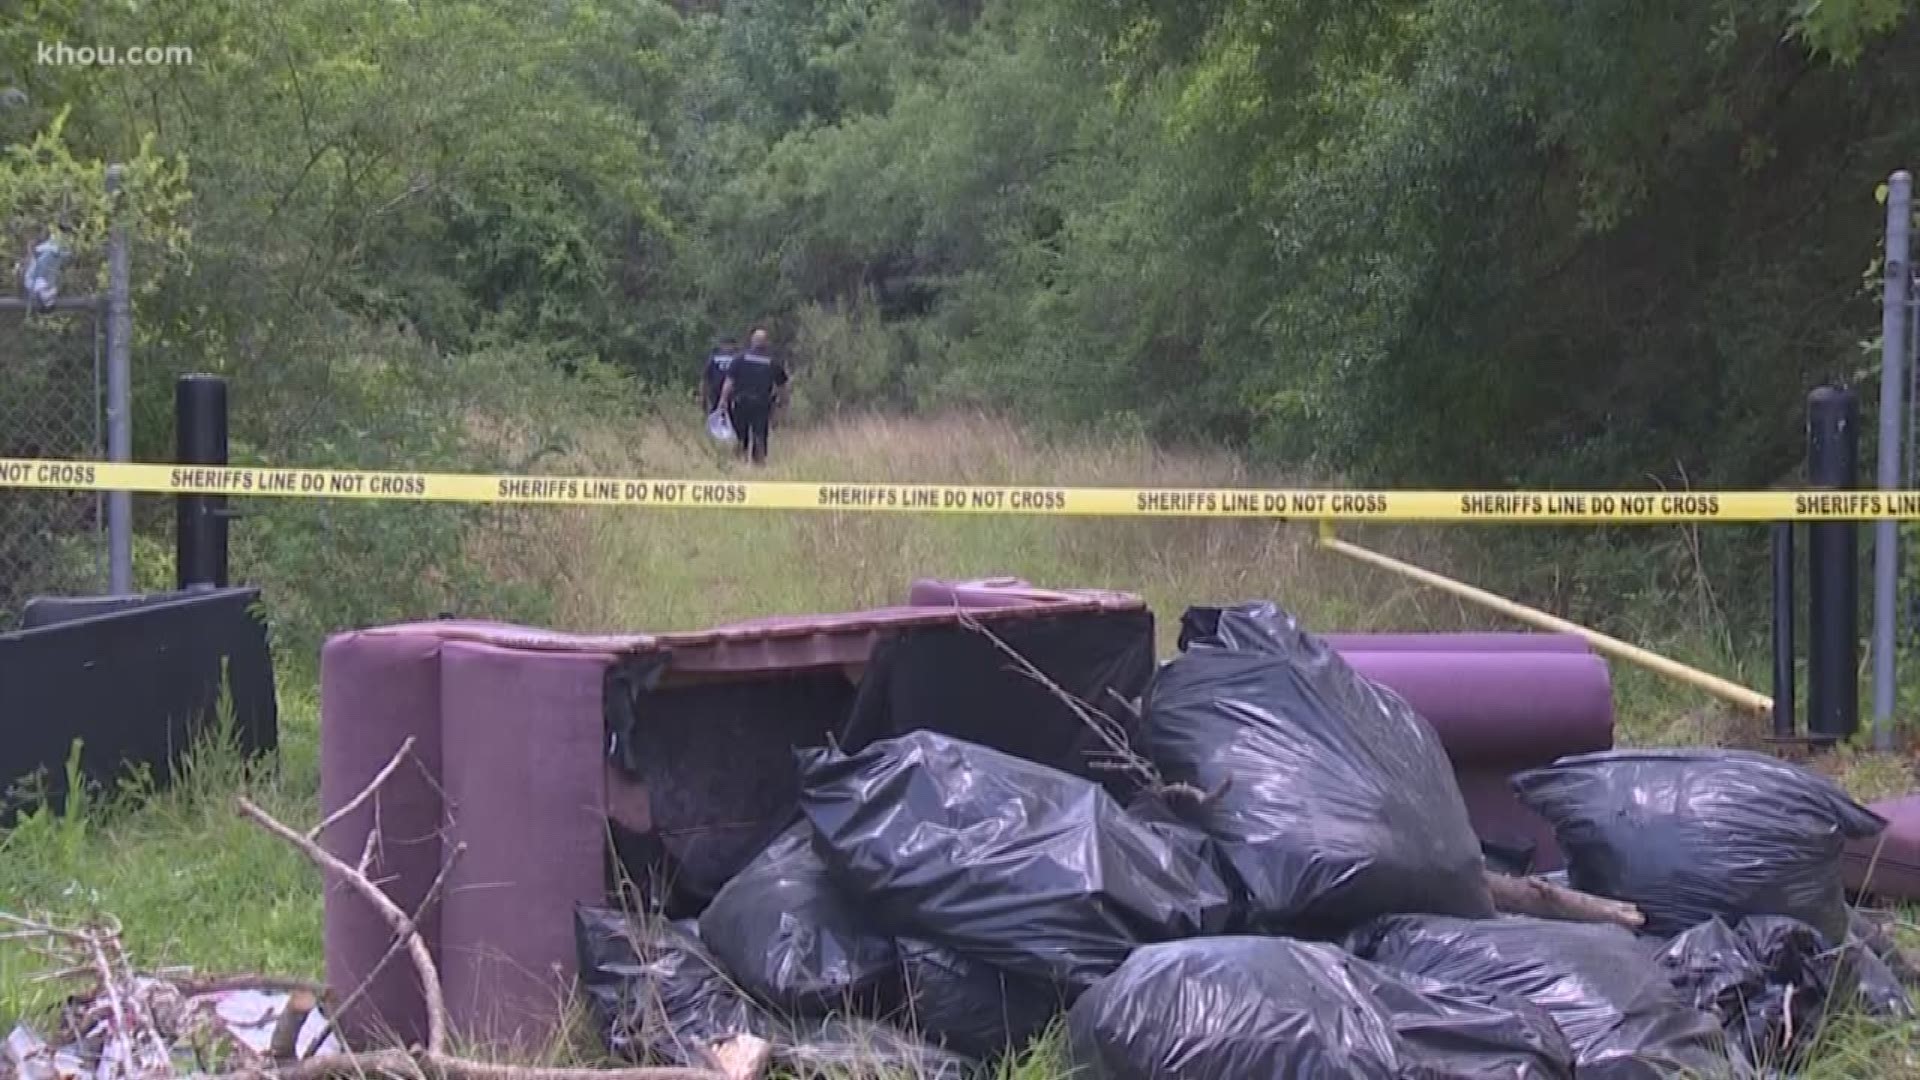 Officials have identified the skeletal remains found last week in northeast Harris County as 22-year-old Luis Rangel, who went missing in May.